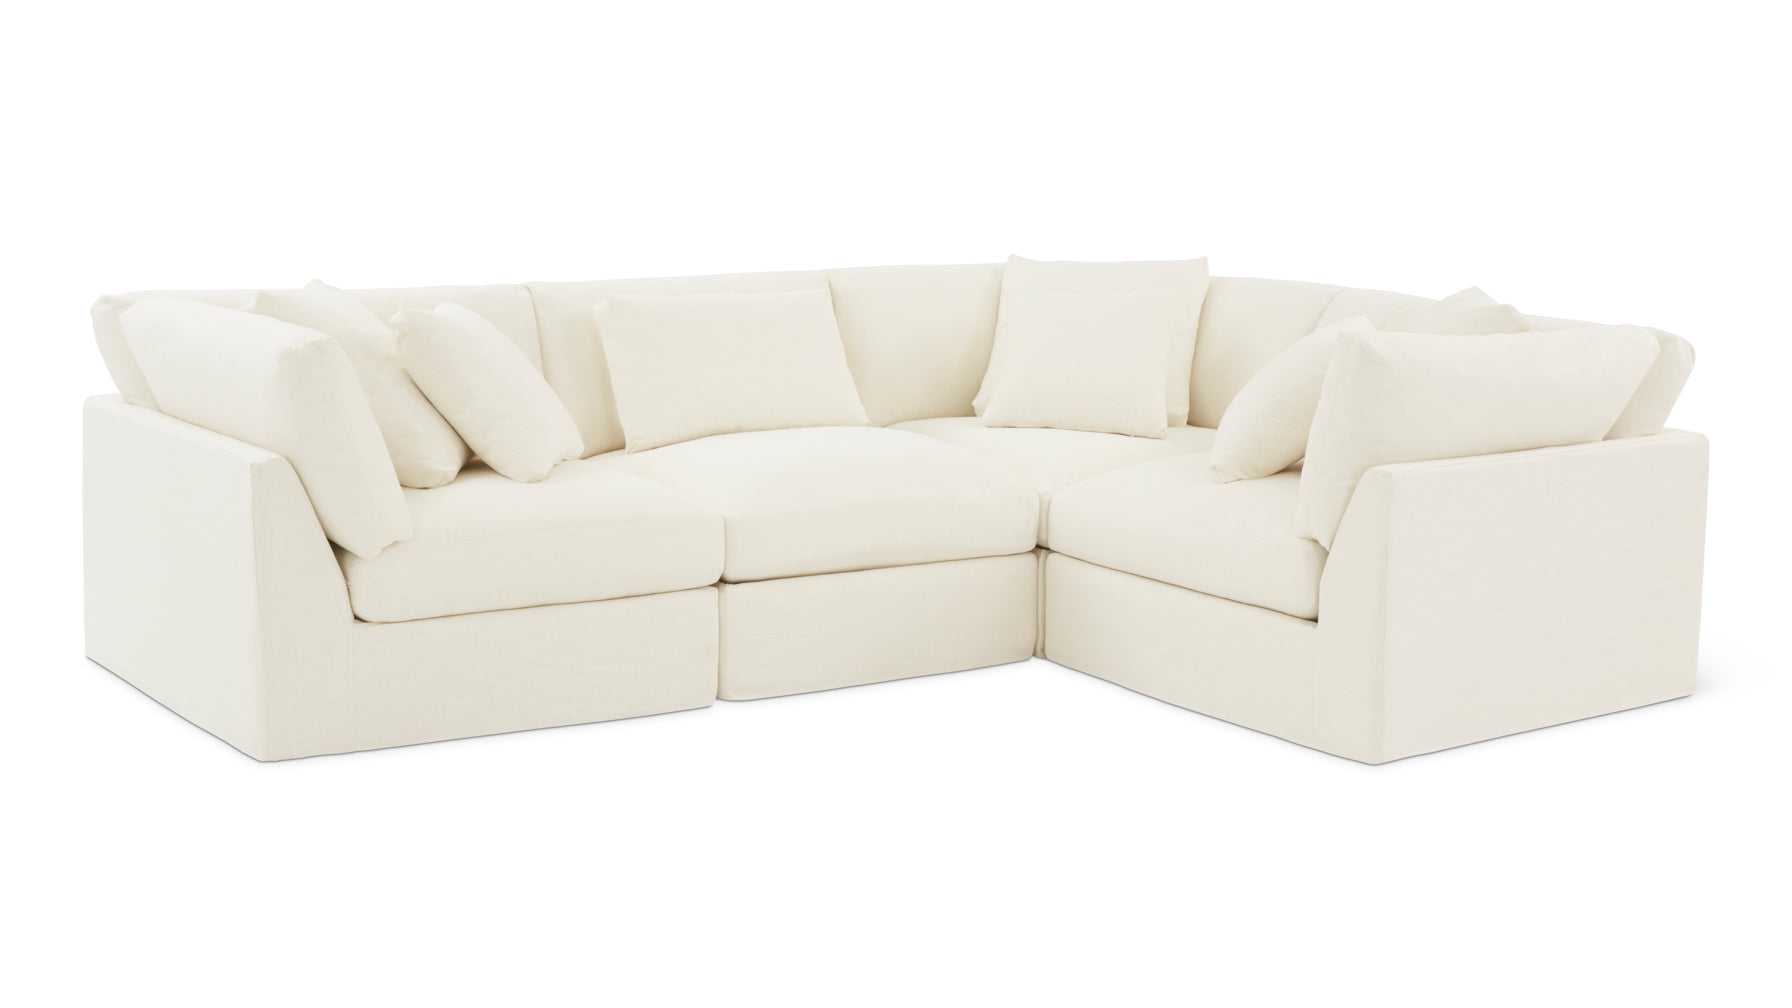 Get Together™ 4-Piece Modular Sectional Closed, Large, Cream Linen - Image 2